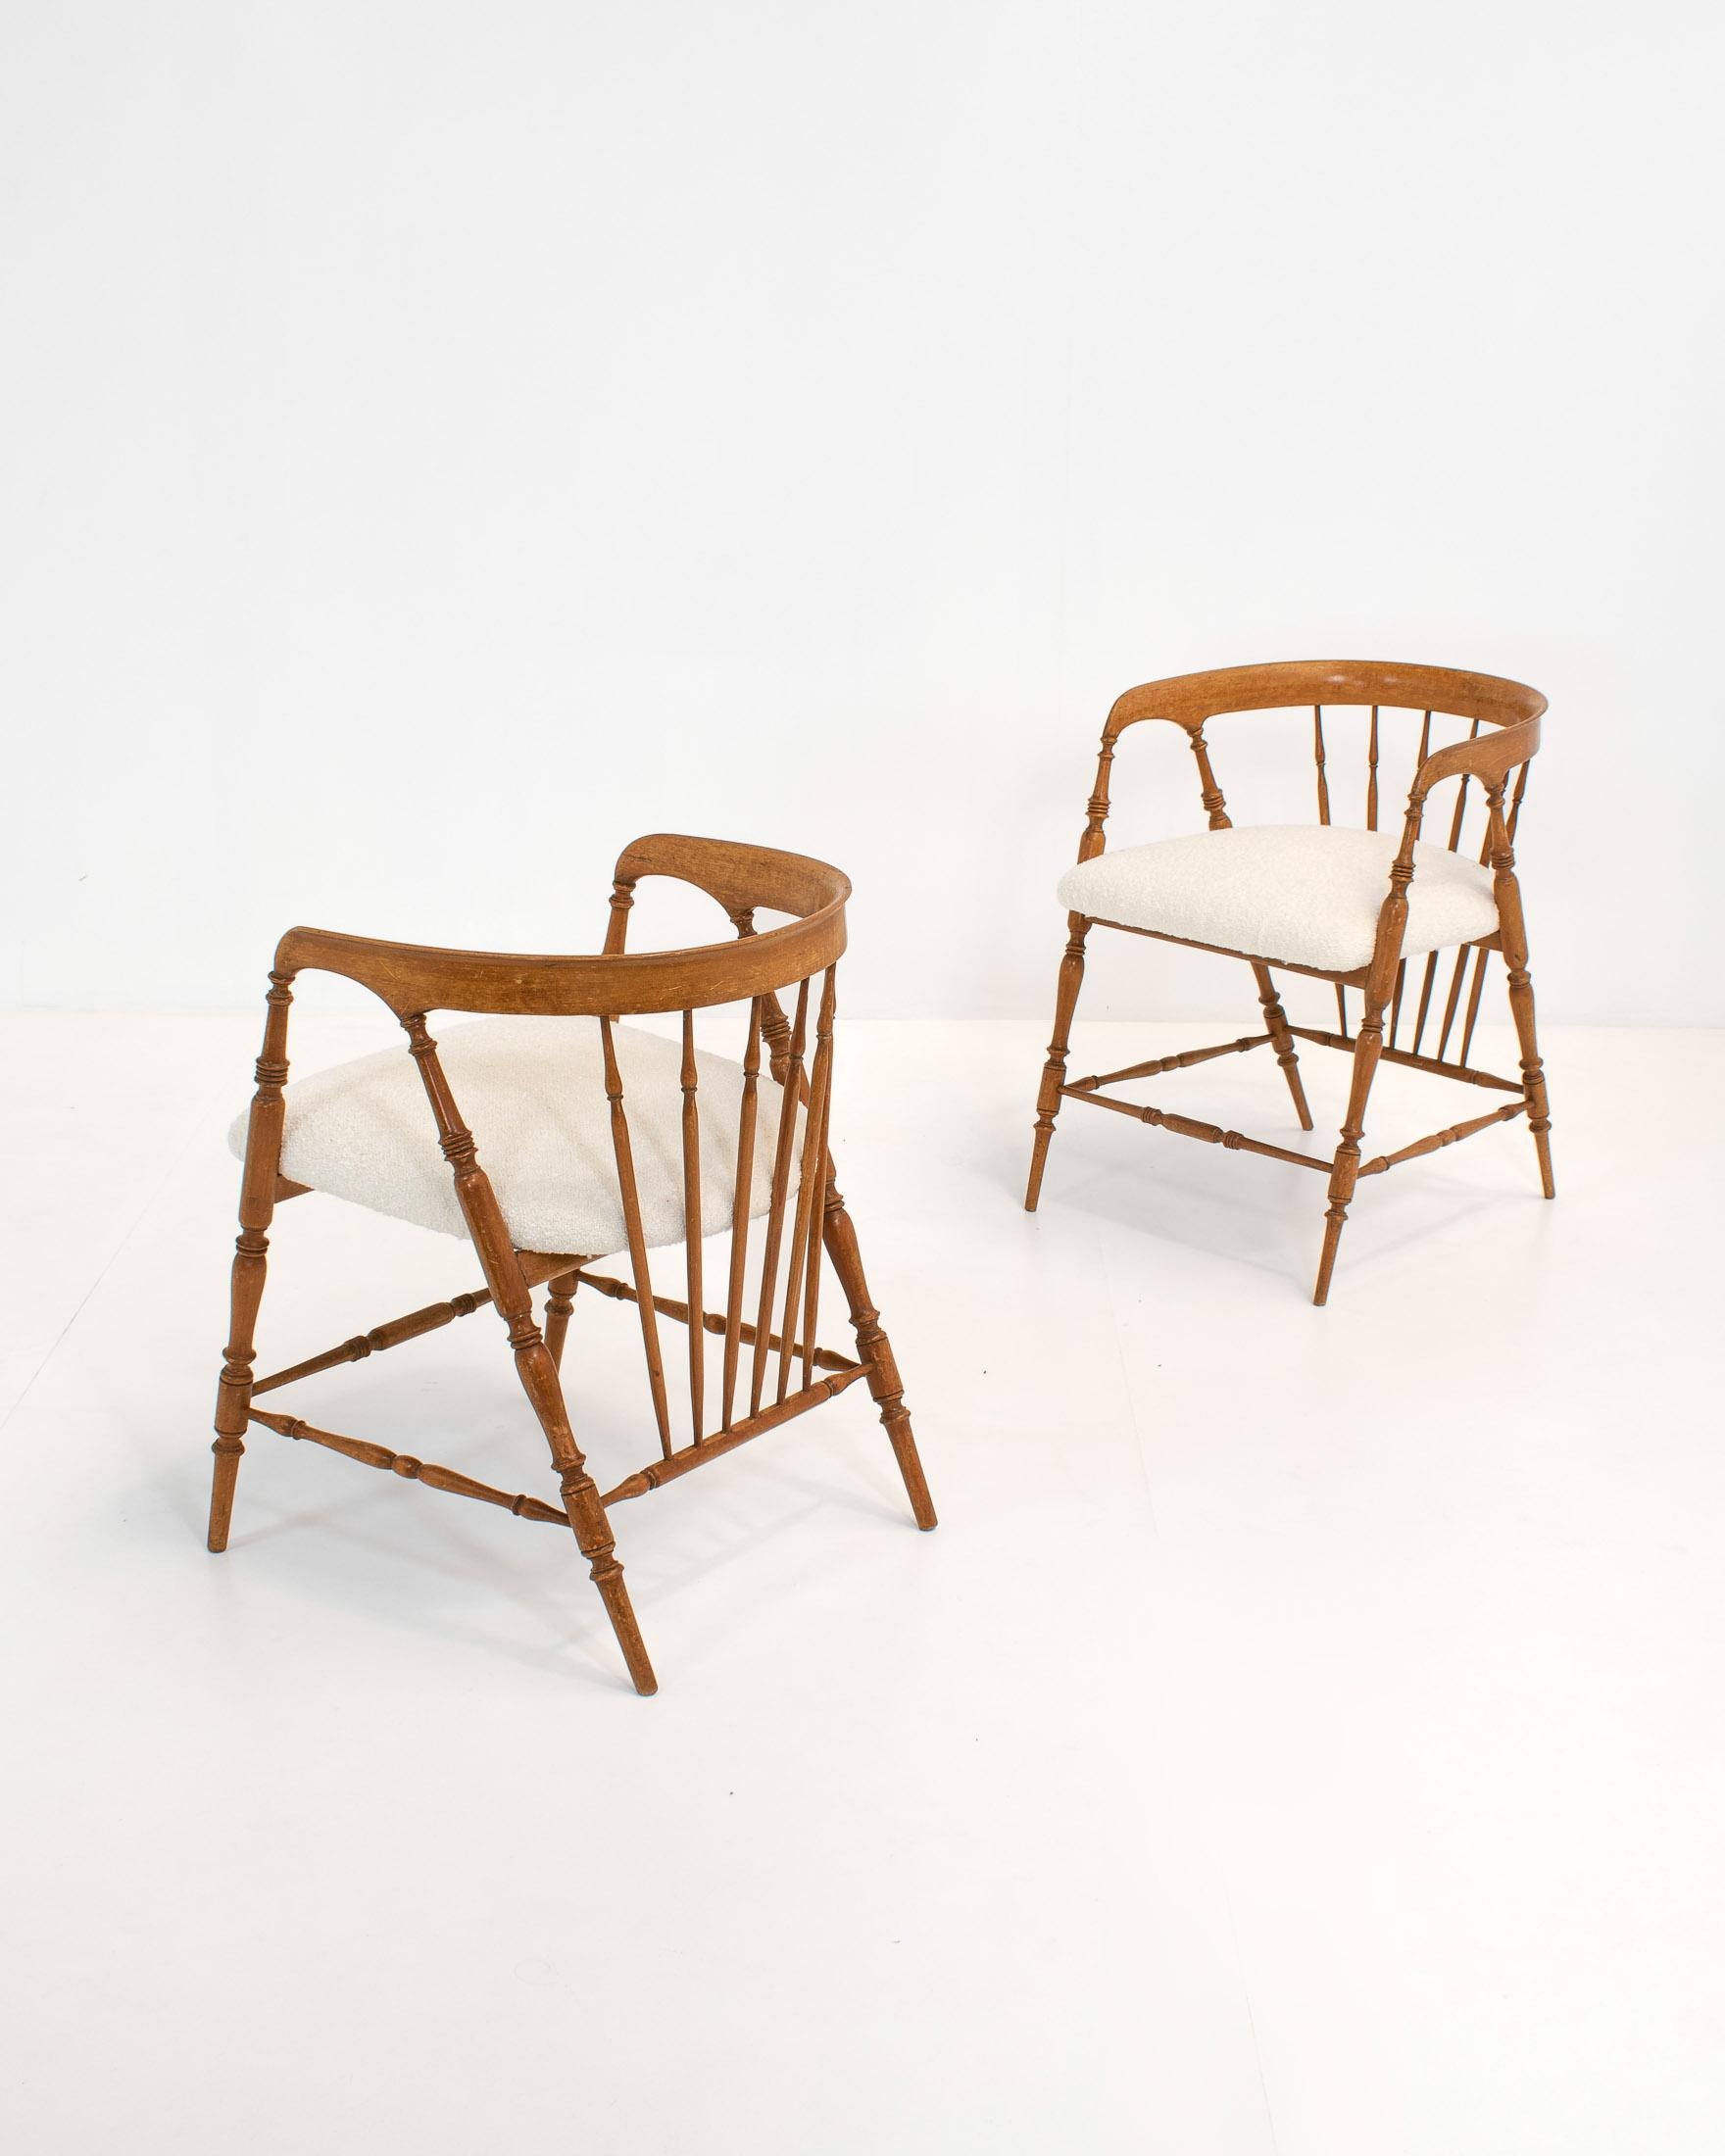 European Pair of Early 20th Century Spindle Back Chairs in Bouclé